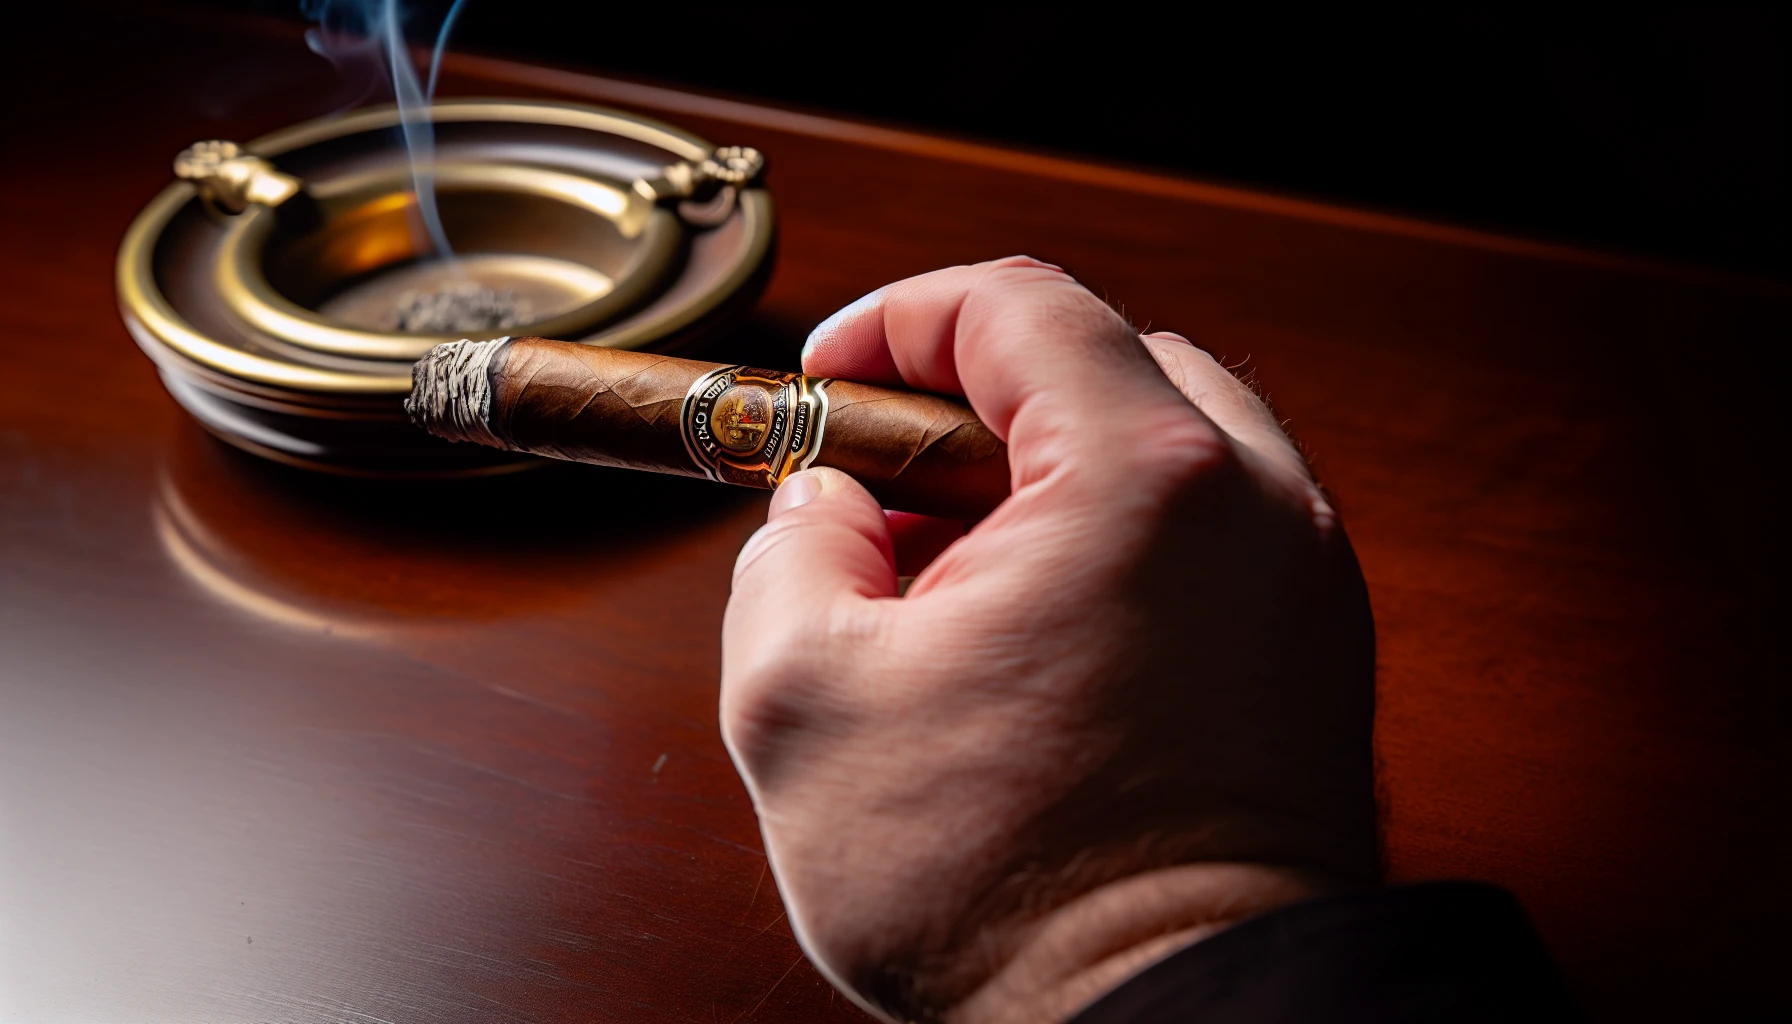 A hand holding a San Lotano Requiem Habano Robusto cigar with an ashtray in the background